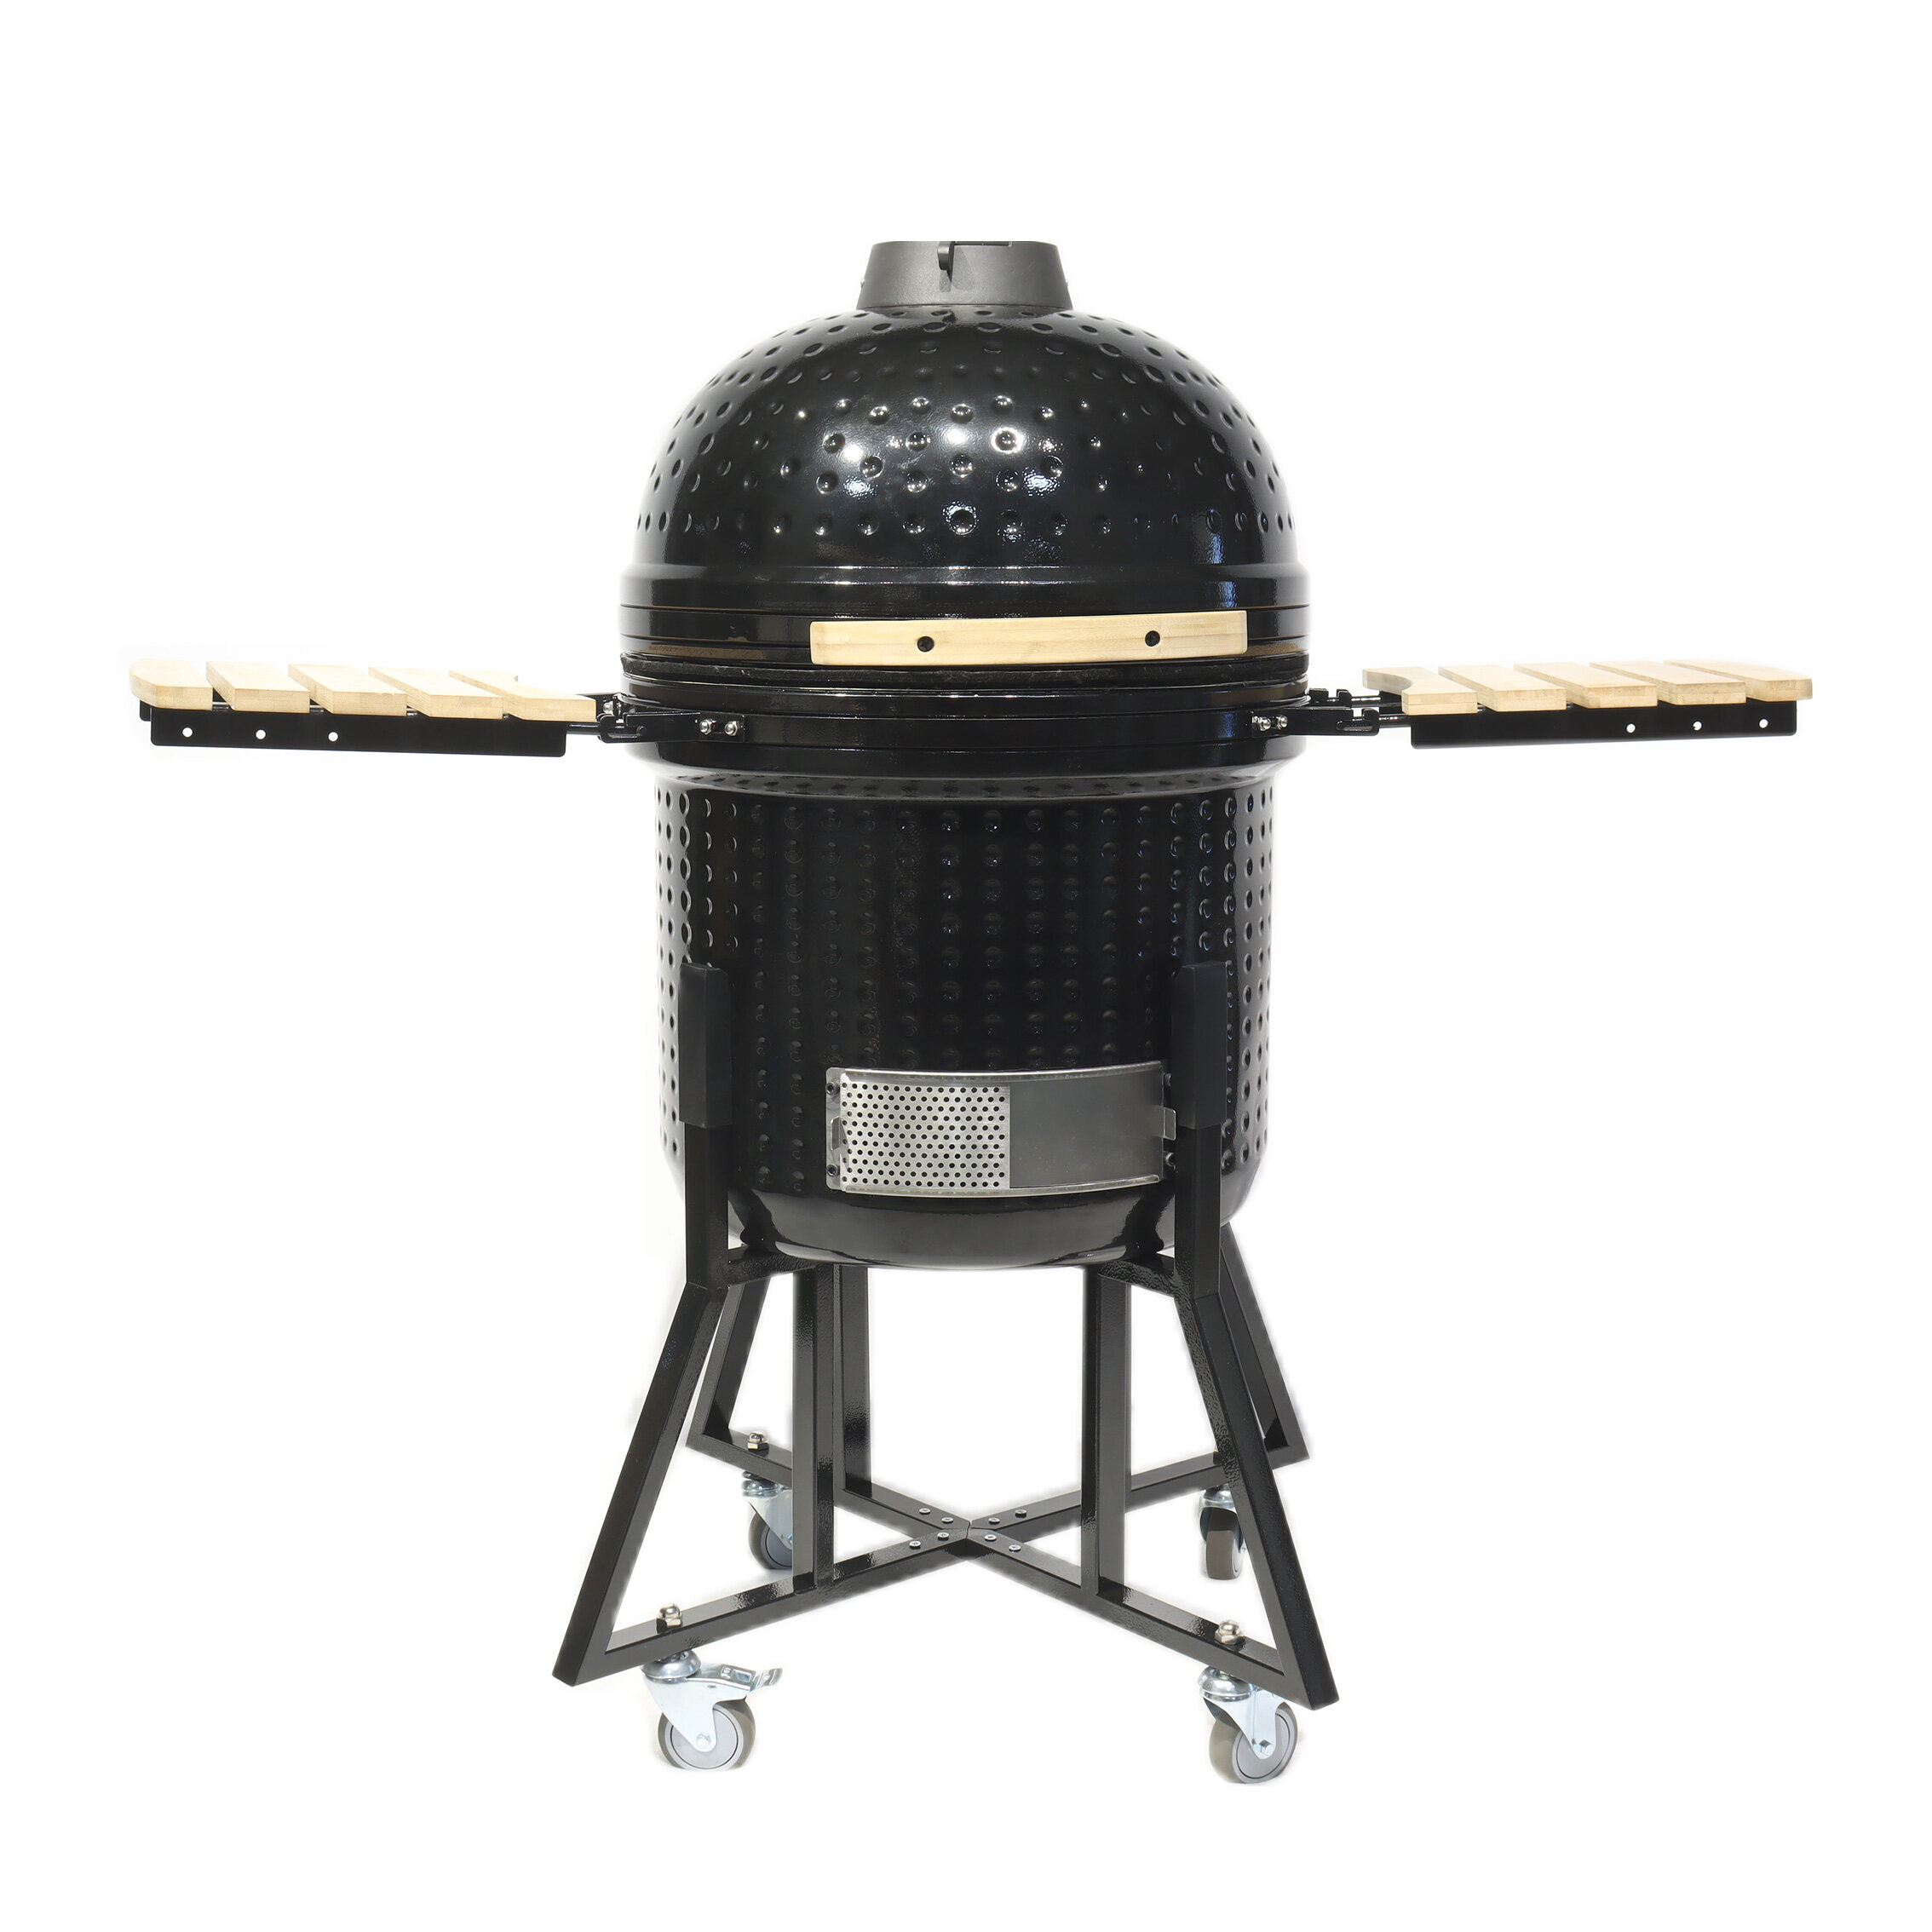 22 Inch Outdoor Ceramic Charcoal Barbecue Grill YX01-007